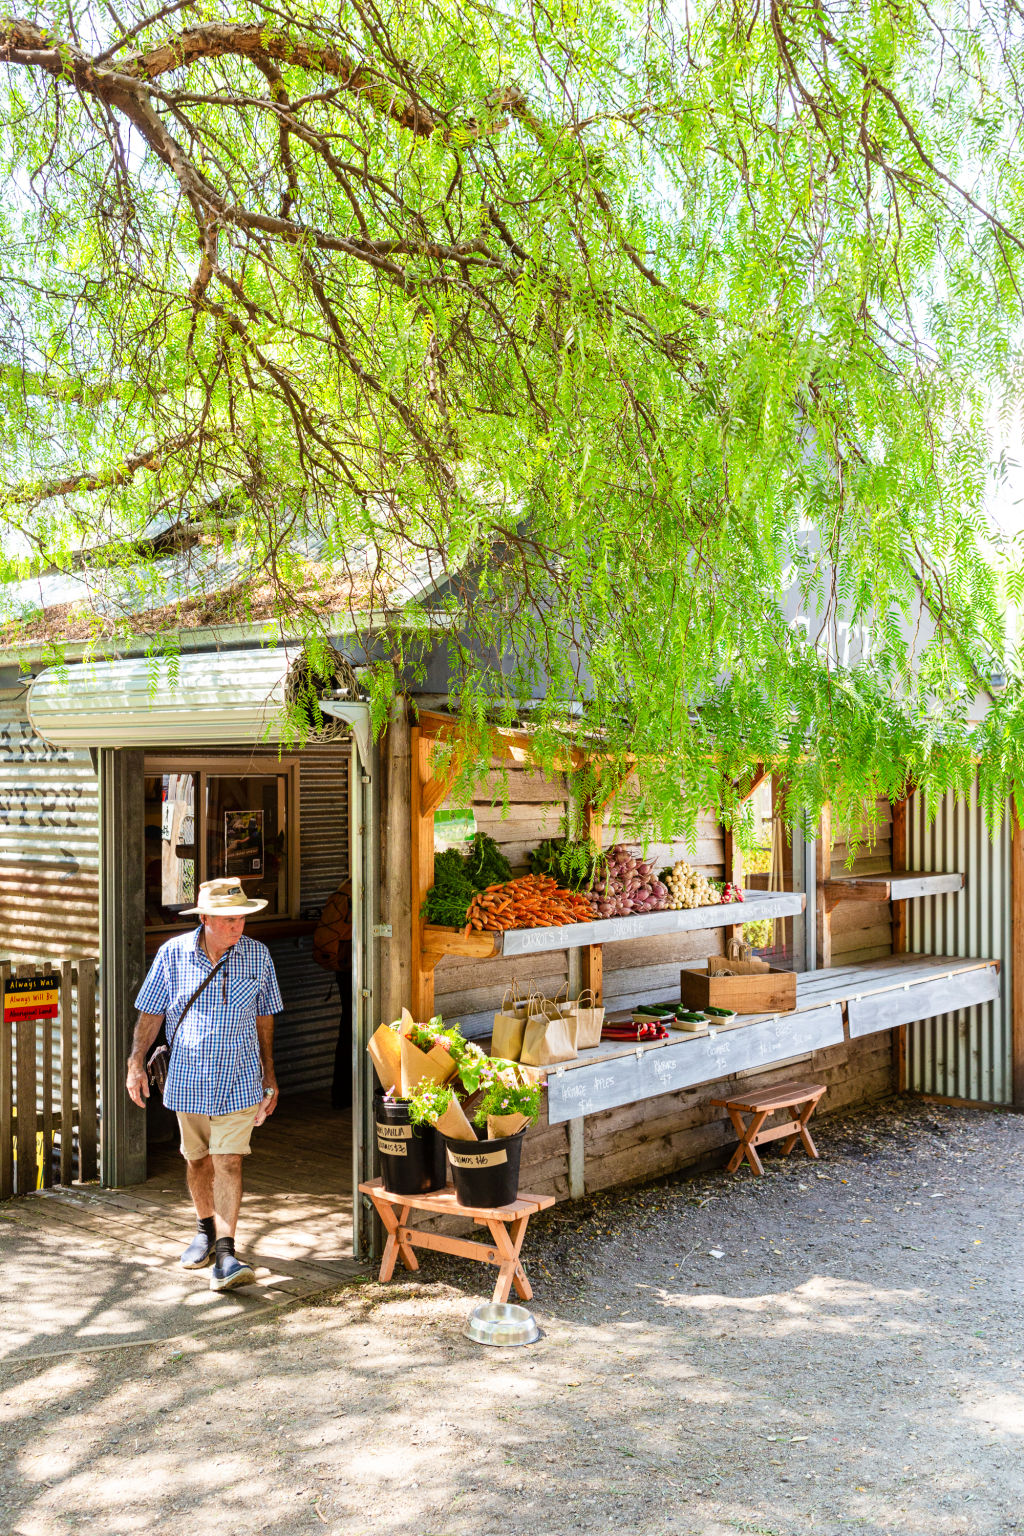 Pick up some fresh produce from the Collingwood Children's Farm. Photo: Greg Briggs